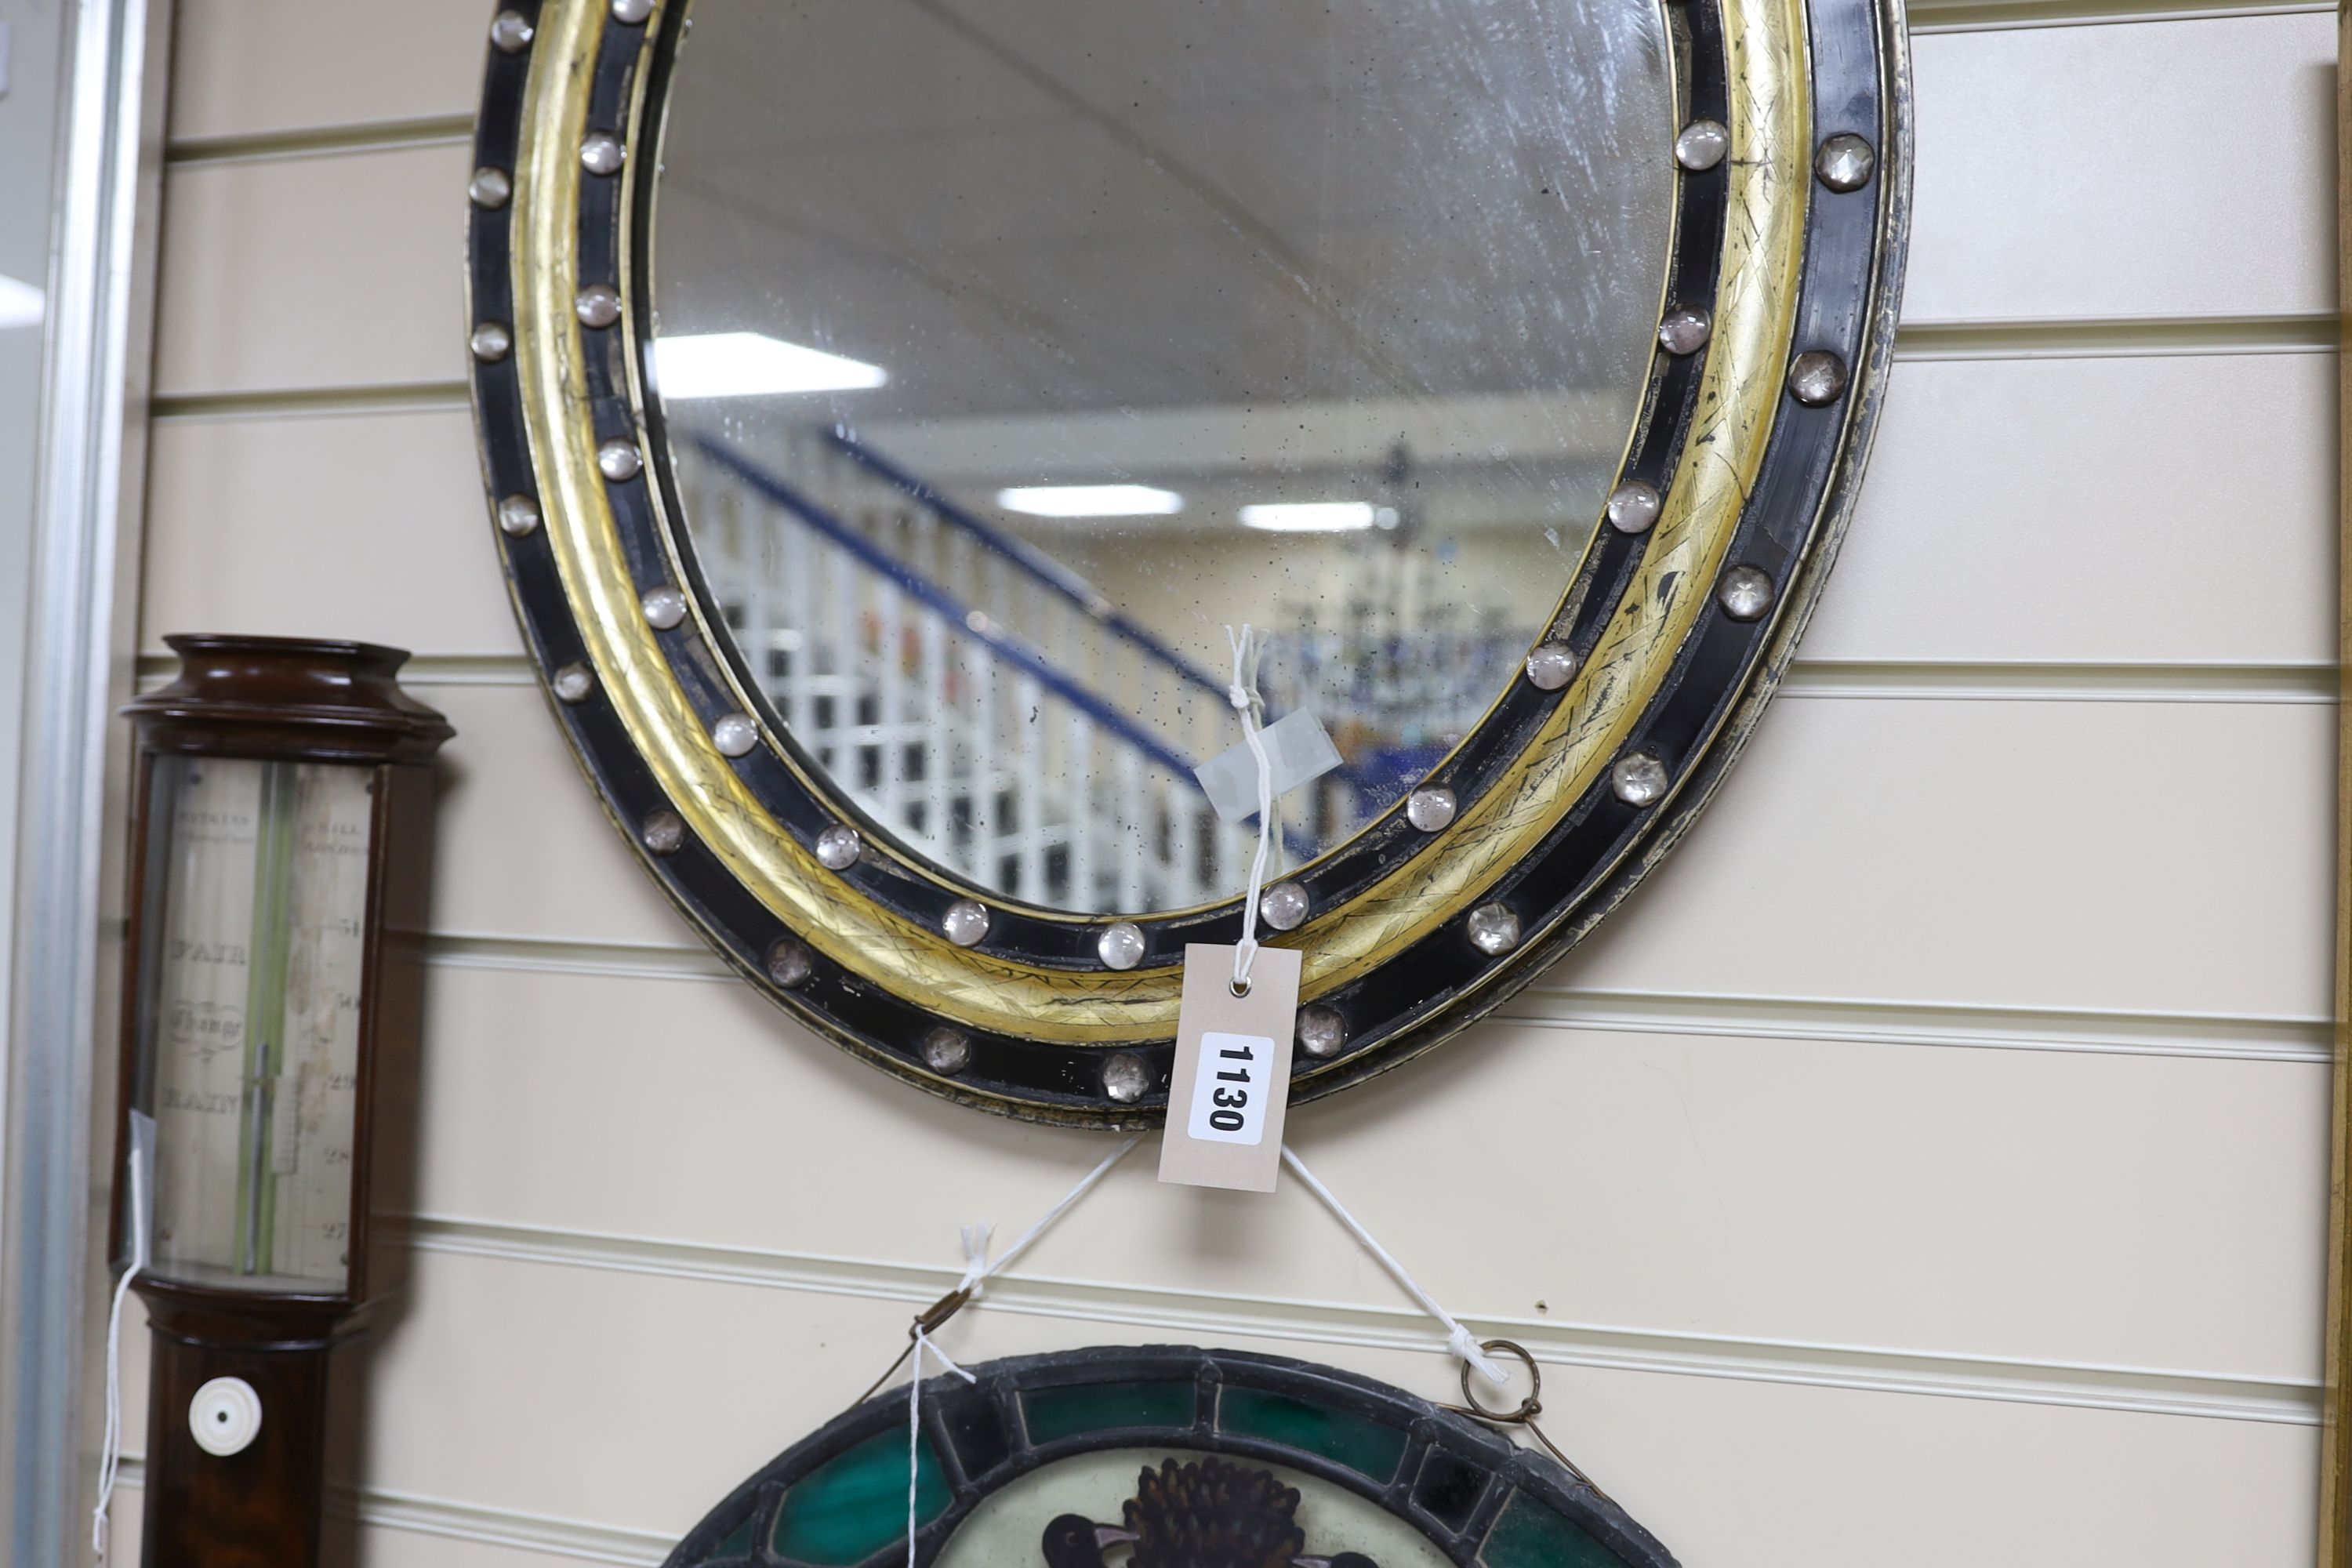 A small 19th century Irish oval wall mirror, with twin faceted and cabochon glass border, width 46cm, height 56cm